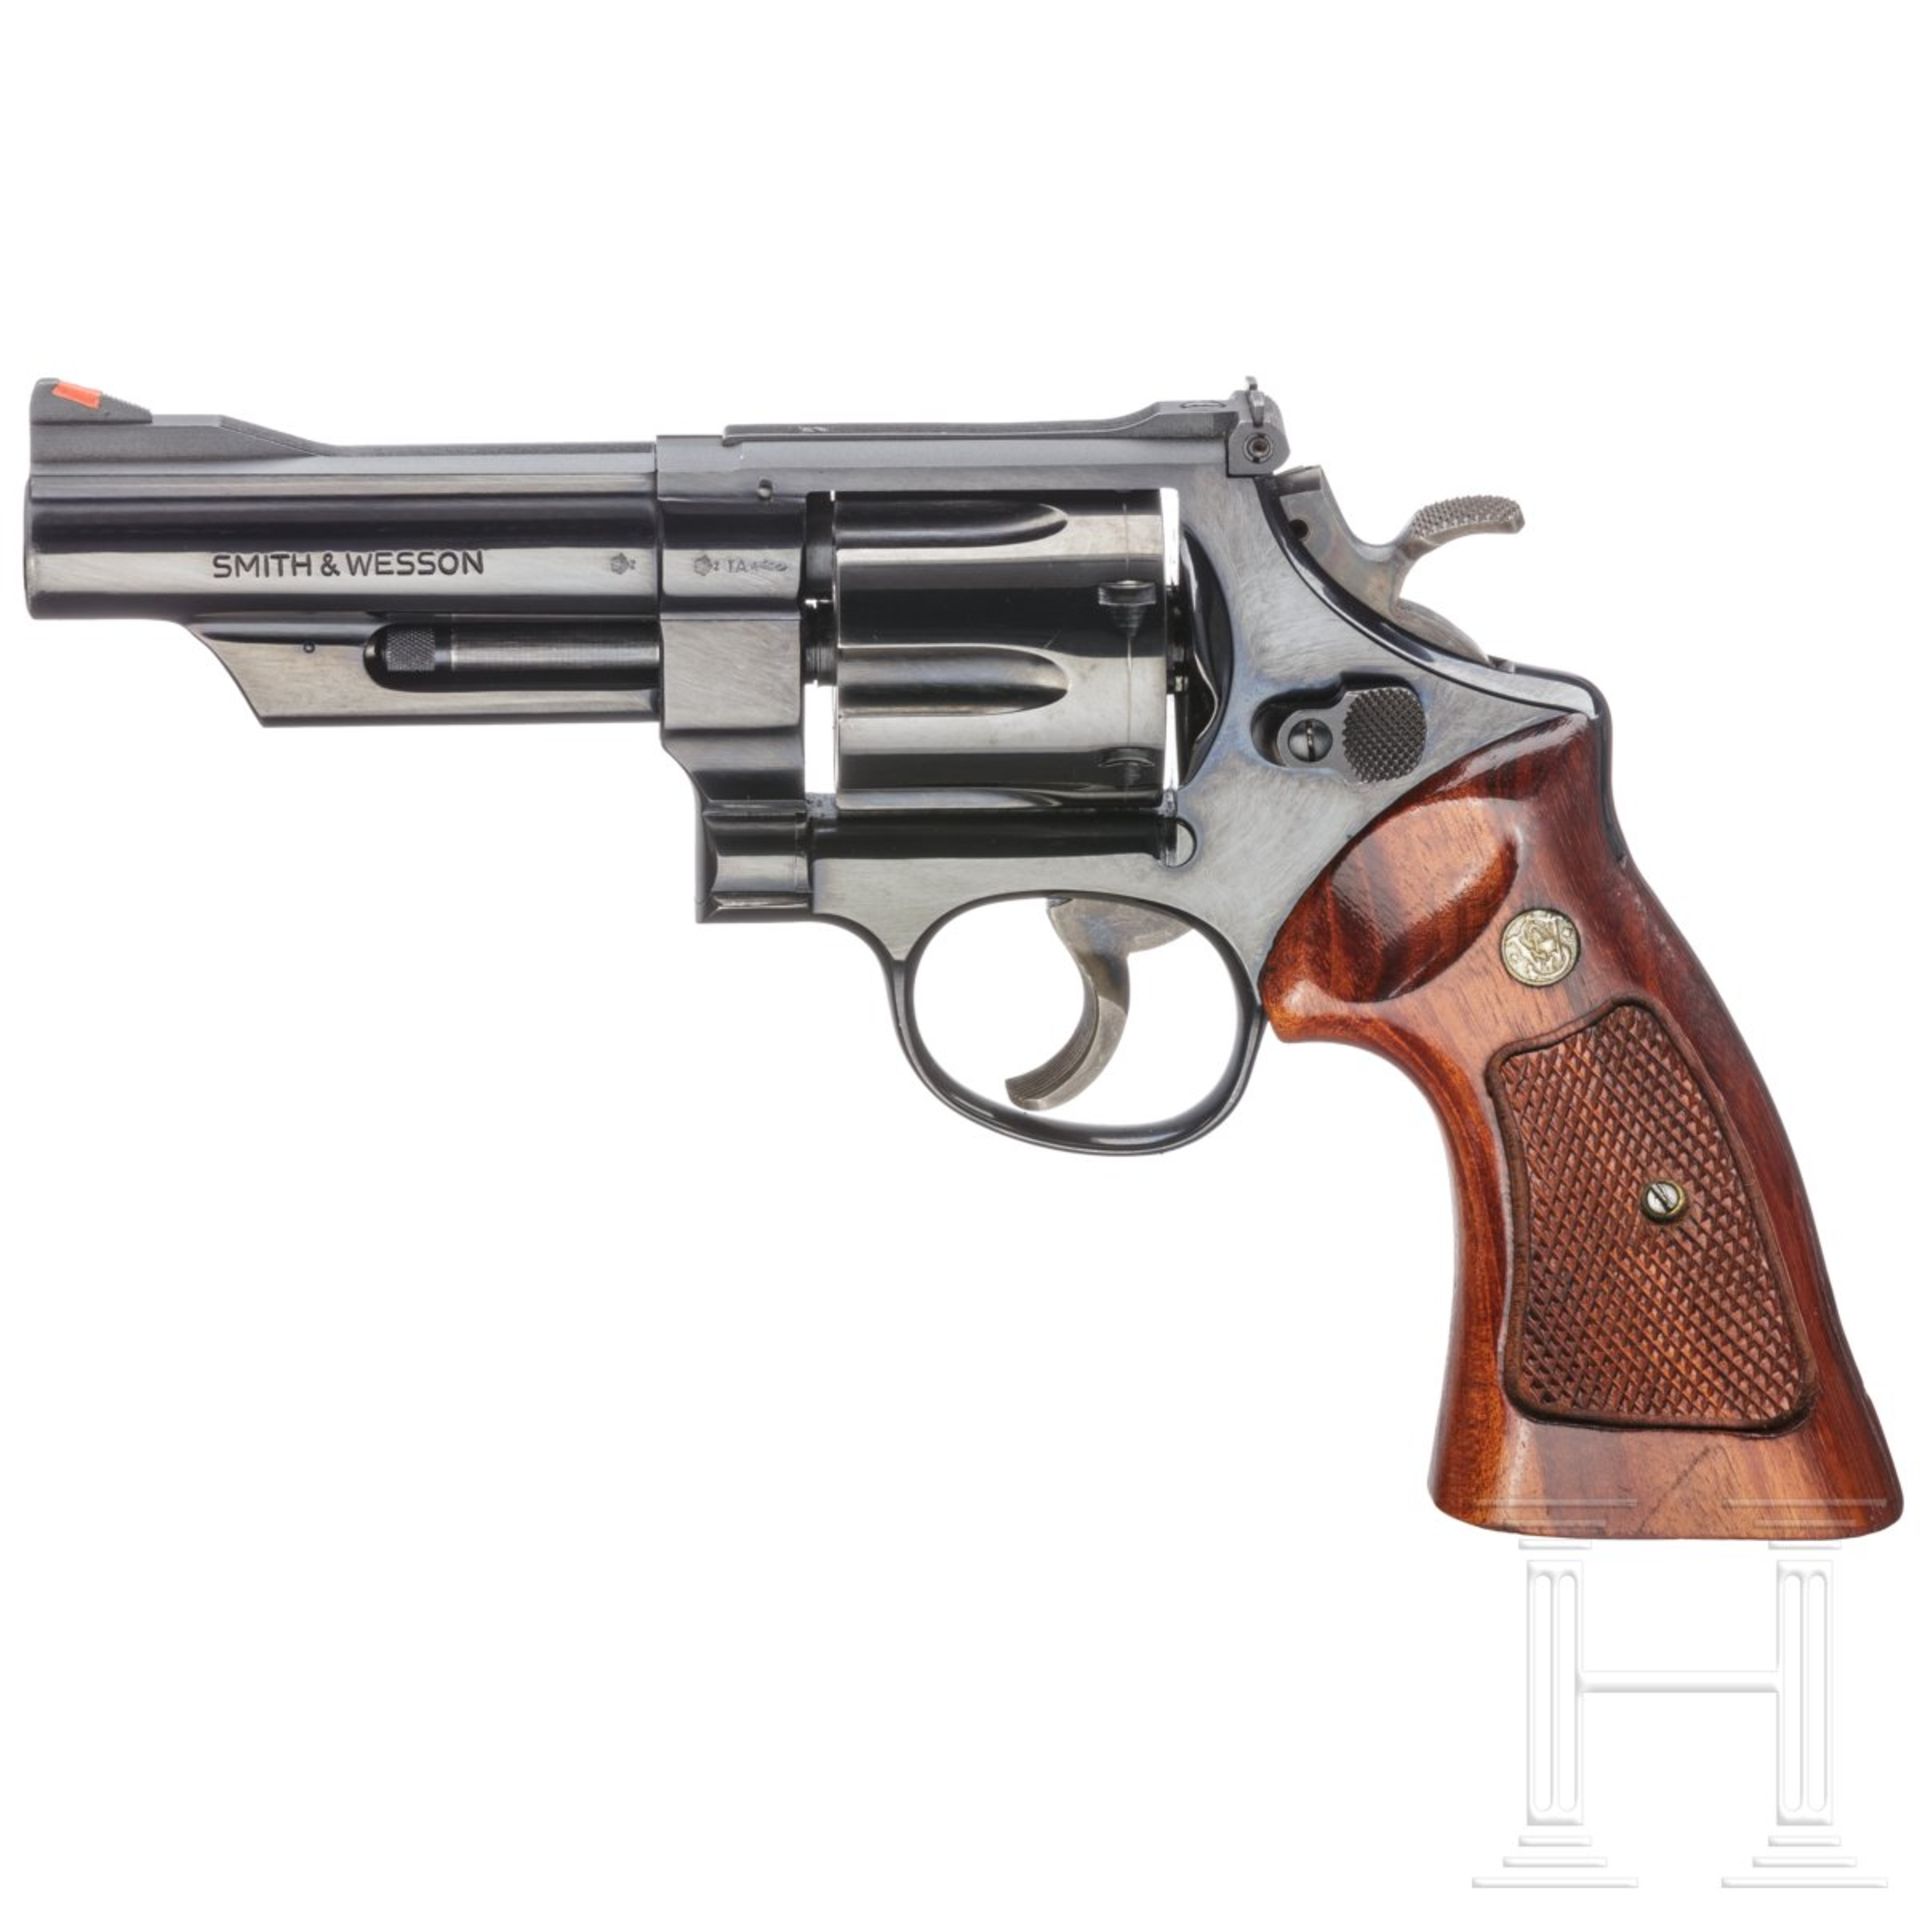 Smith & Wesson Mod. 25-5, "The 1955 Model .45 Target Heavy Barrel", in Schatulle